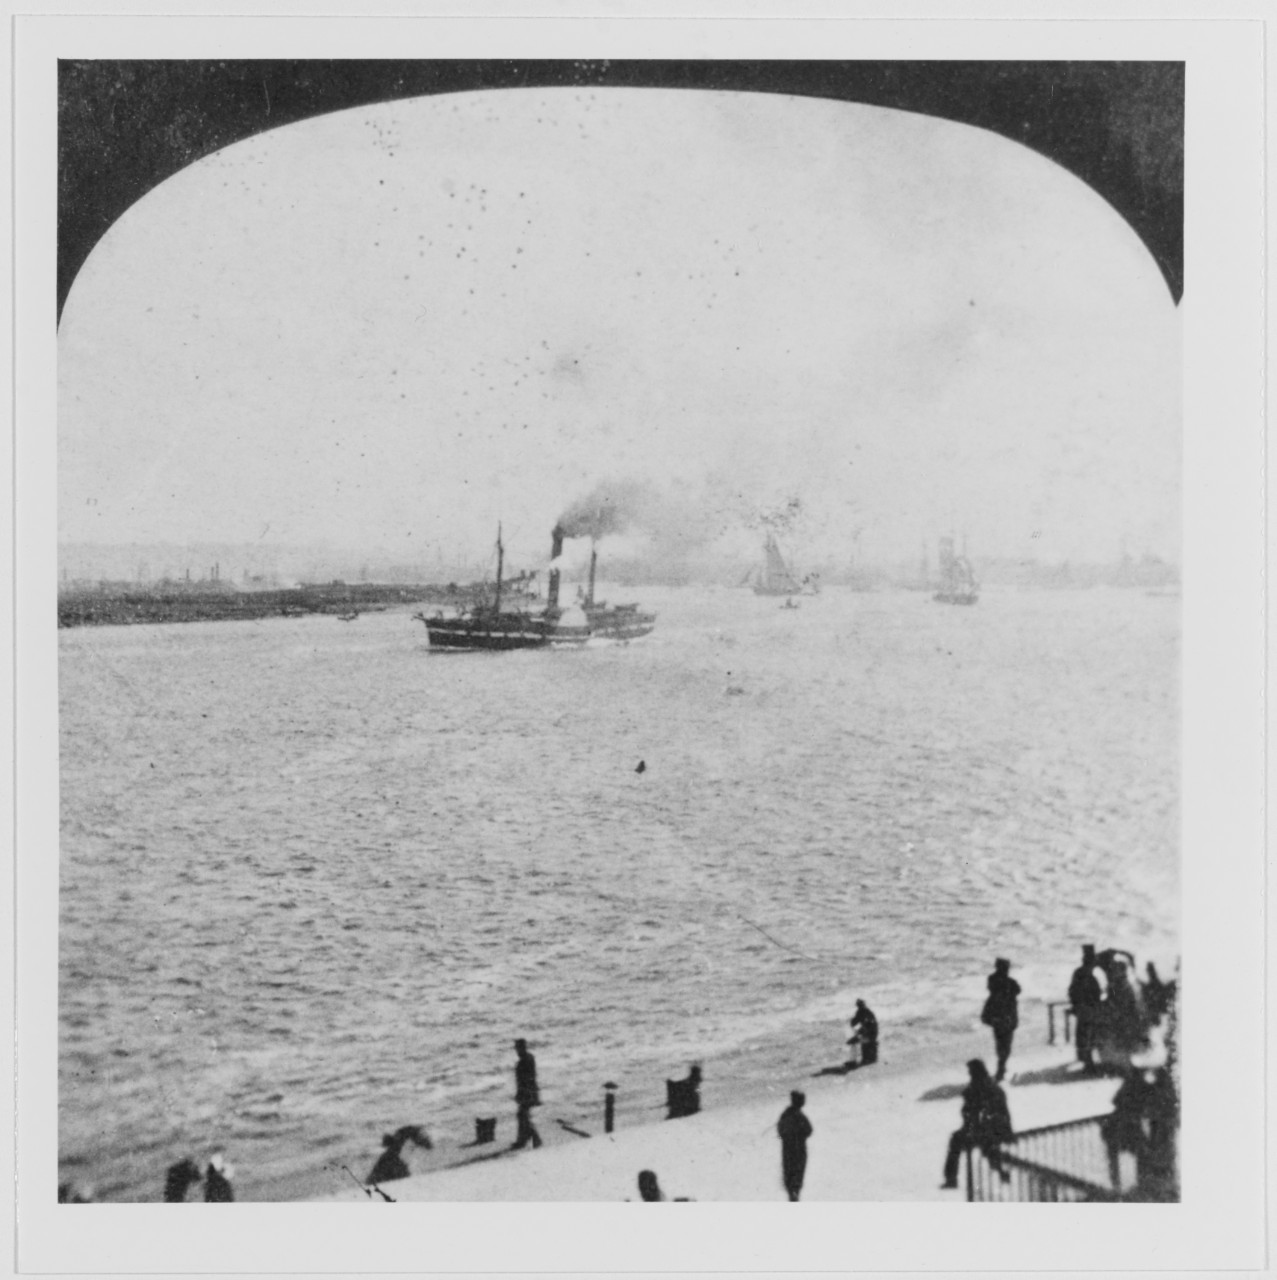 "Instantaneous Marine View". Stereo pair photograph from the "American Views" series. Busy harbor, with a very old-fashioned Side-wheel Steamship in center